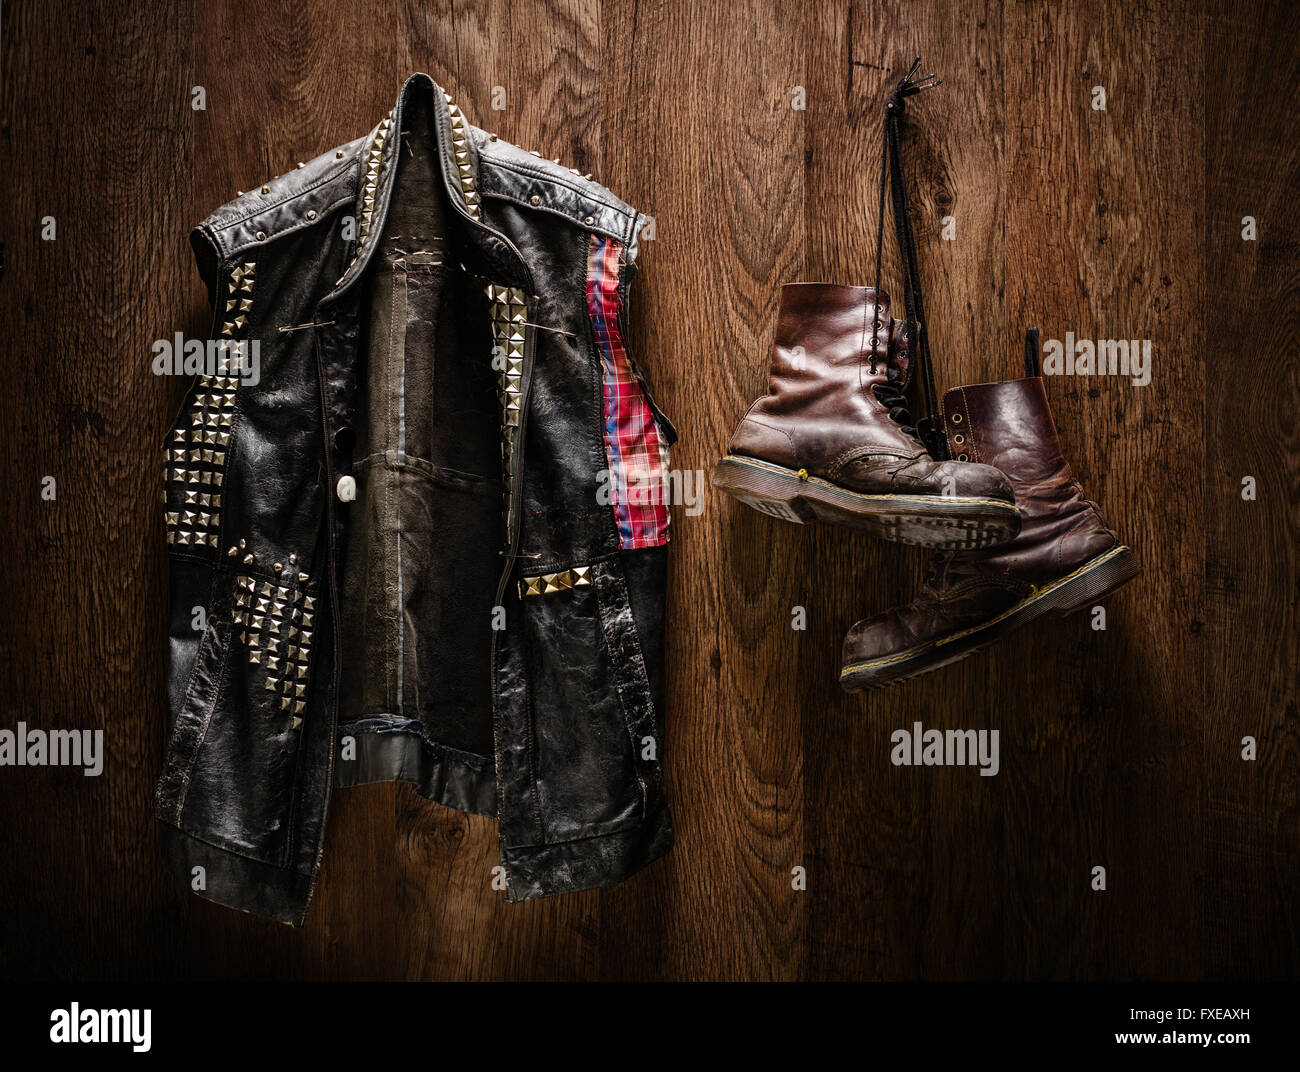 Punk-rock leather jacket and a pair of old boots hanging on a wooden wall Stock Photo